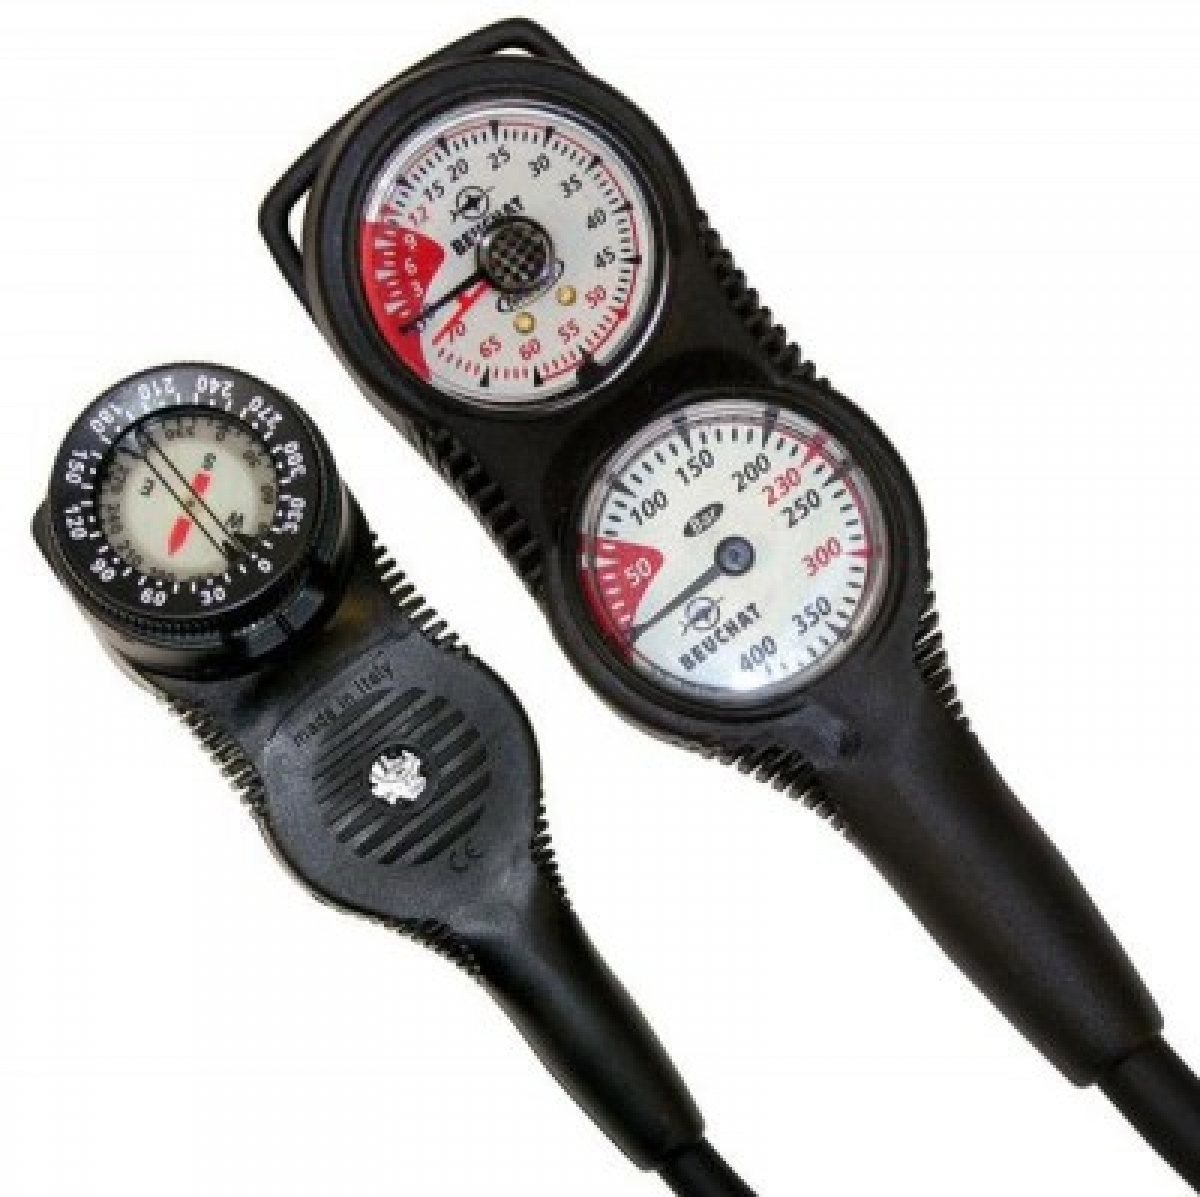 Details about   Seac Sub CONSOLE 3 Pressure Depth Gauge and Compass 